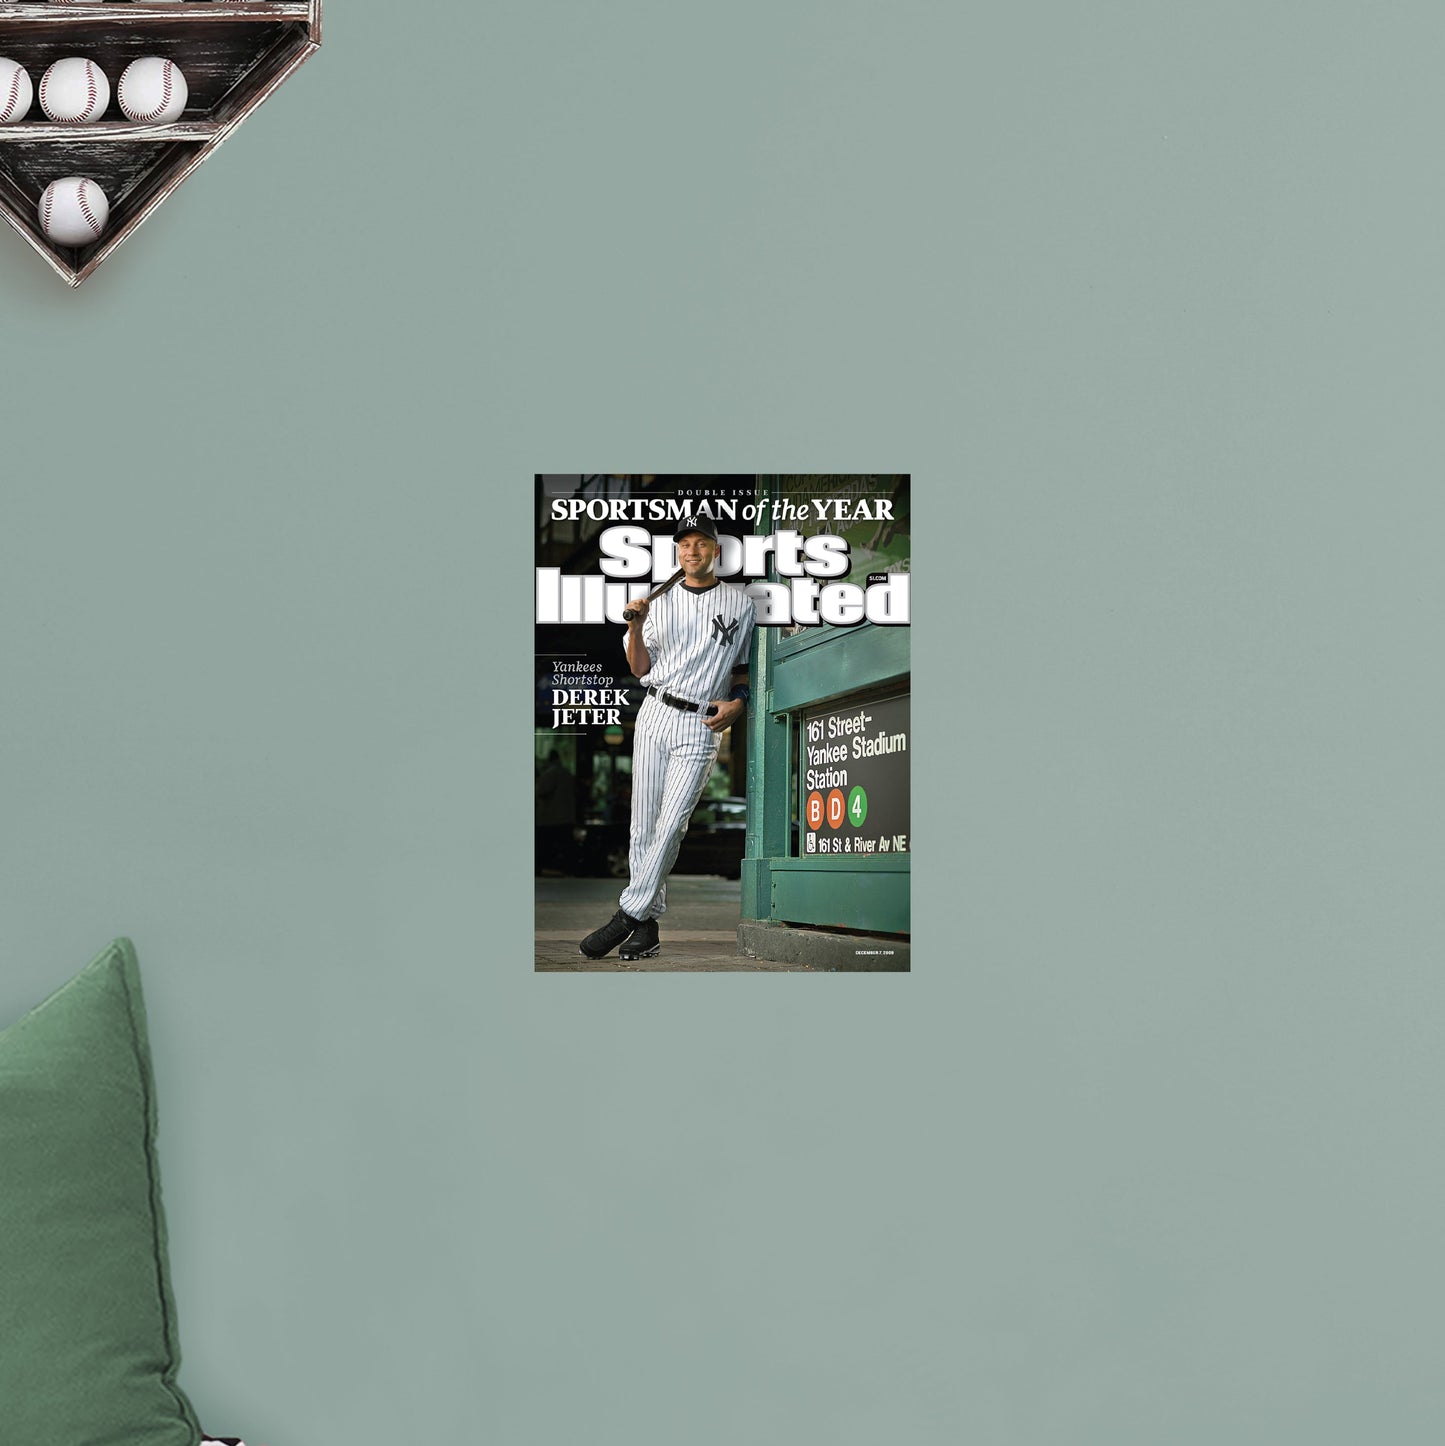 New York Yankees: Derek Jeter December 2009 Sportsman of the Year Sports Illustrated Cover - Officially Licensed MLB Removable Adhesive Decal